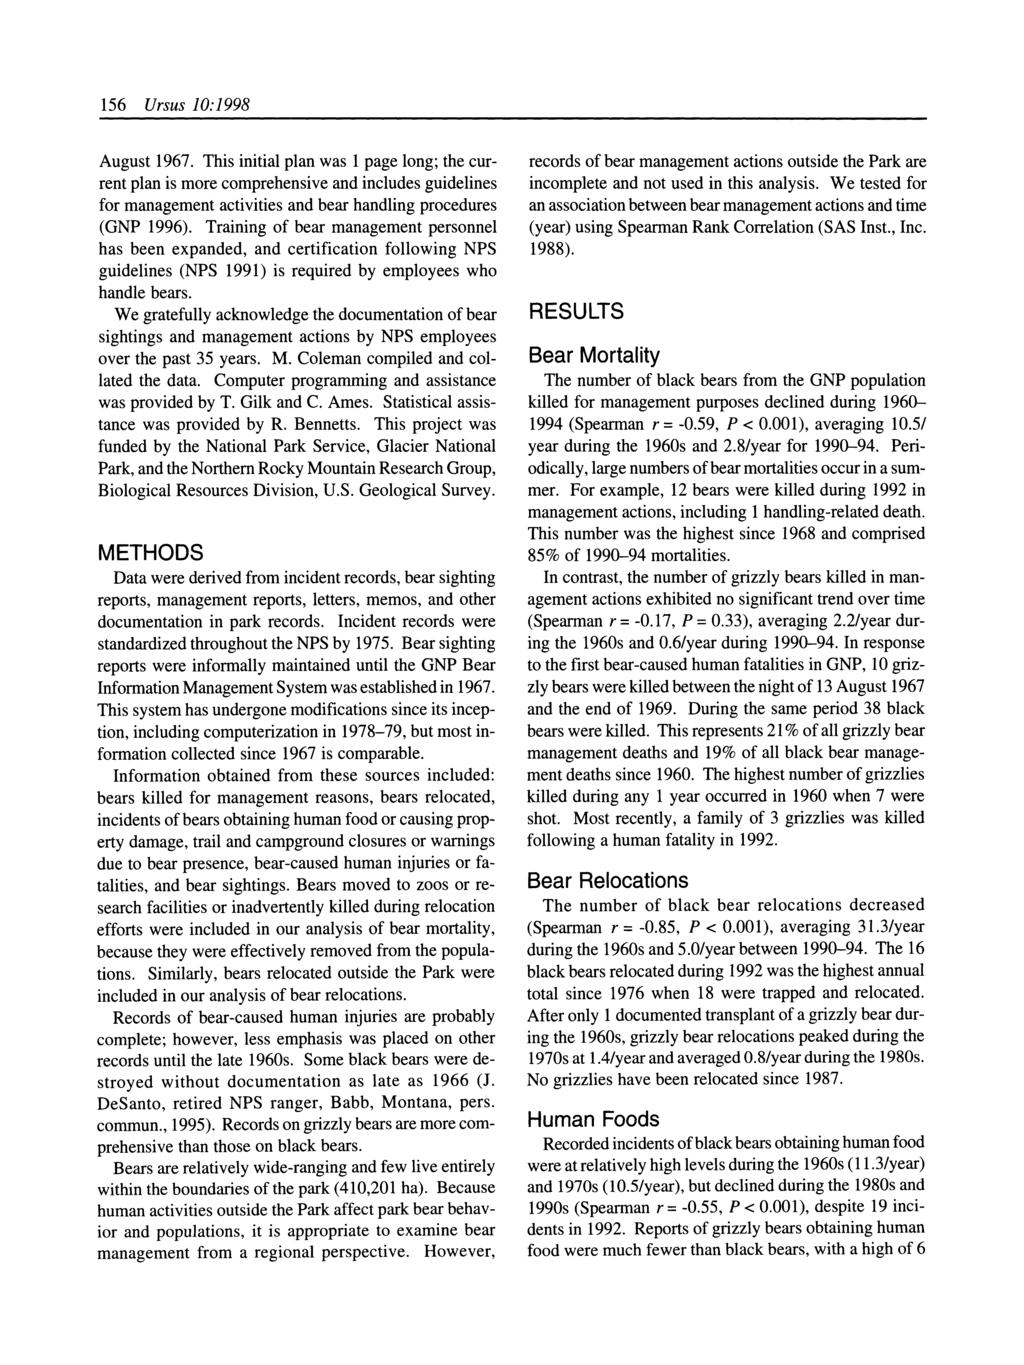 156 Ursus 10:1998 August 1967. This initial plan was 1 page long; the current plan is more comprehensive and includes guidelines for management activities and bear handling procedures (GNP 1996).